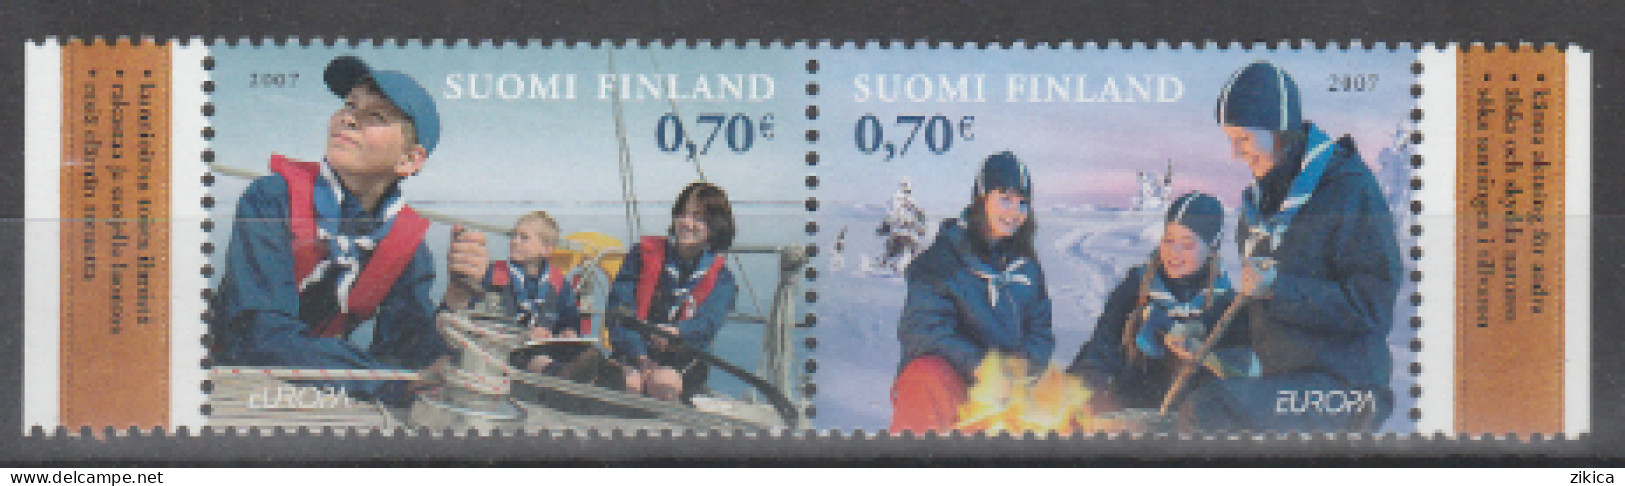 Finland - 2007 EUROPA Stamps - The 100th Ann. Of Scouting. MNH** - Ungebraucht